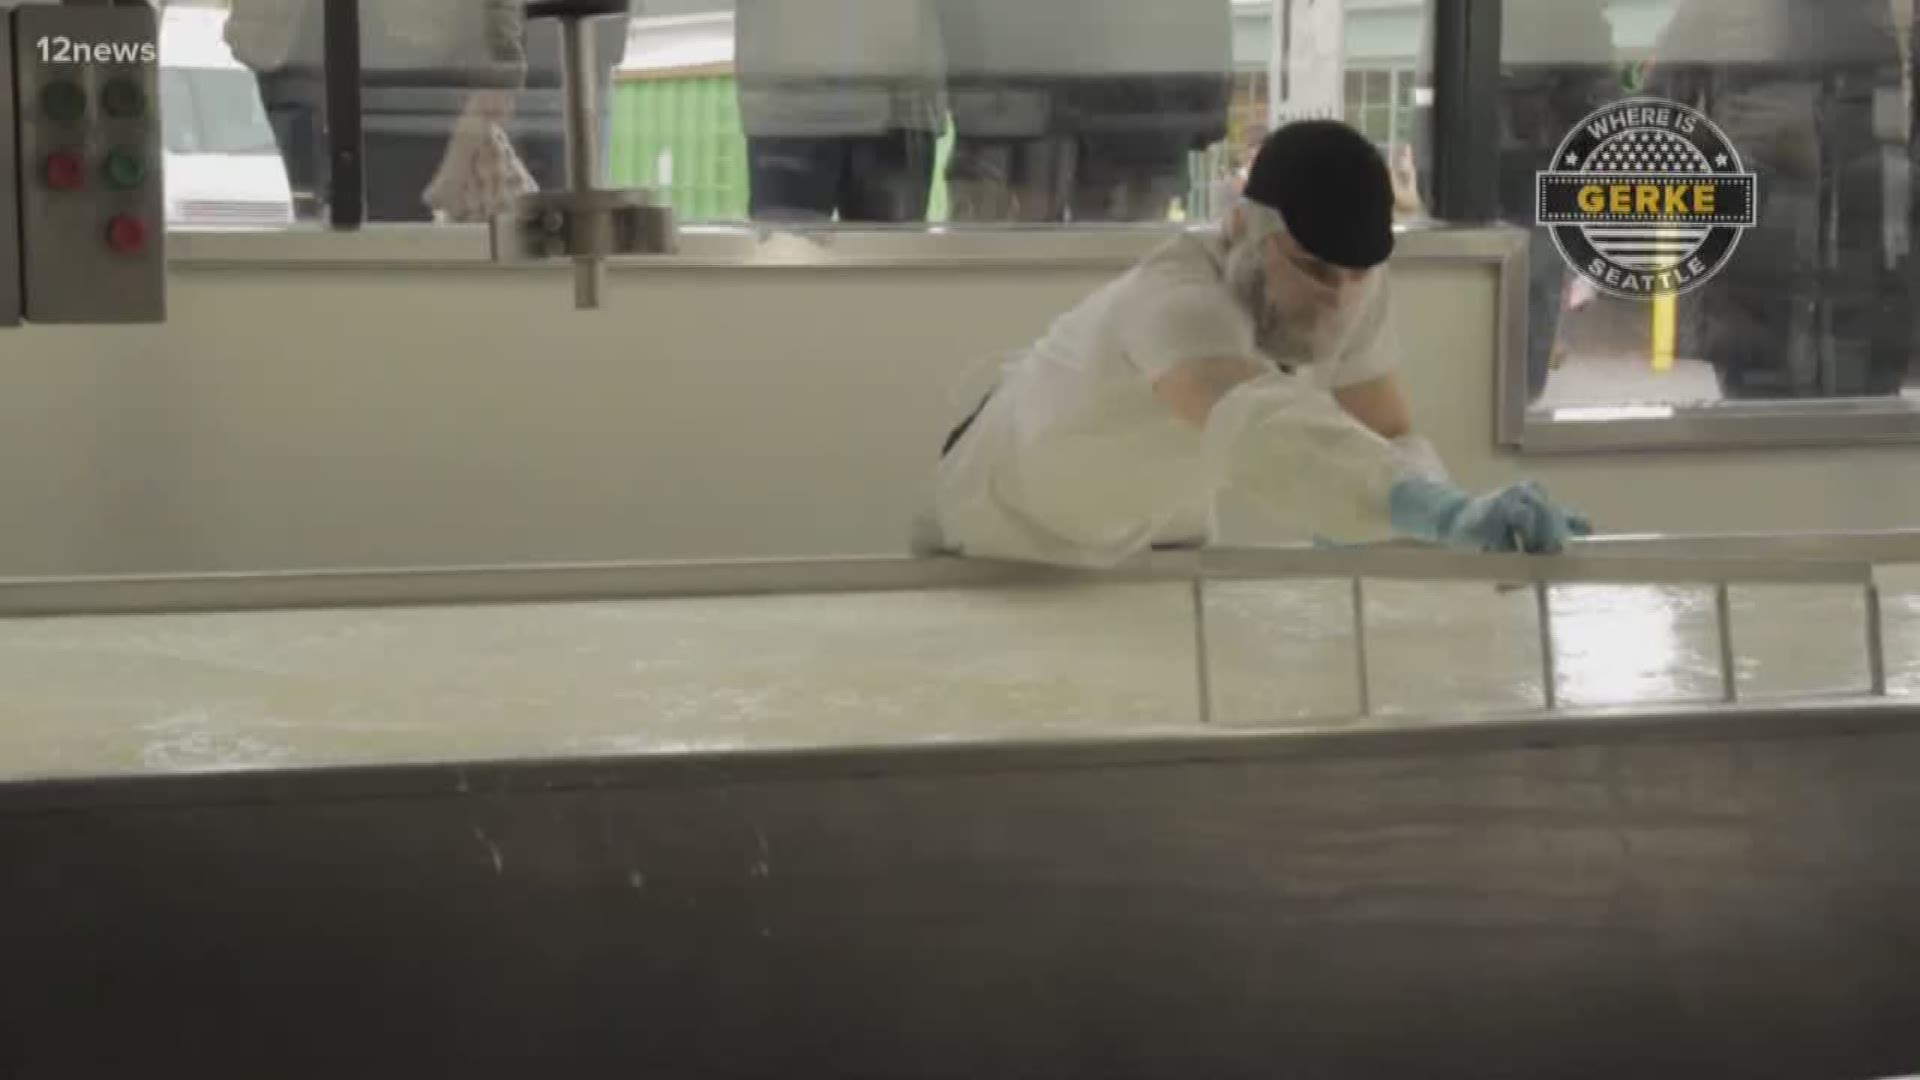 A Seattle favorite is Beecher's handmade cheese. Paul gives us a look at their cheese-making process.